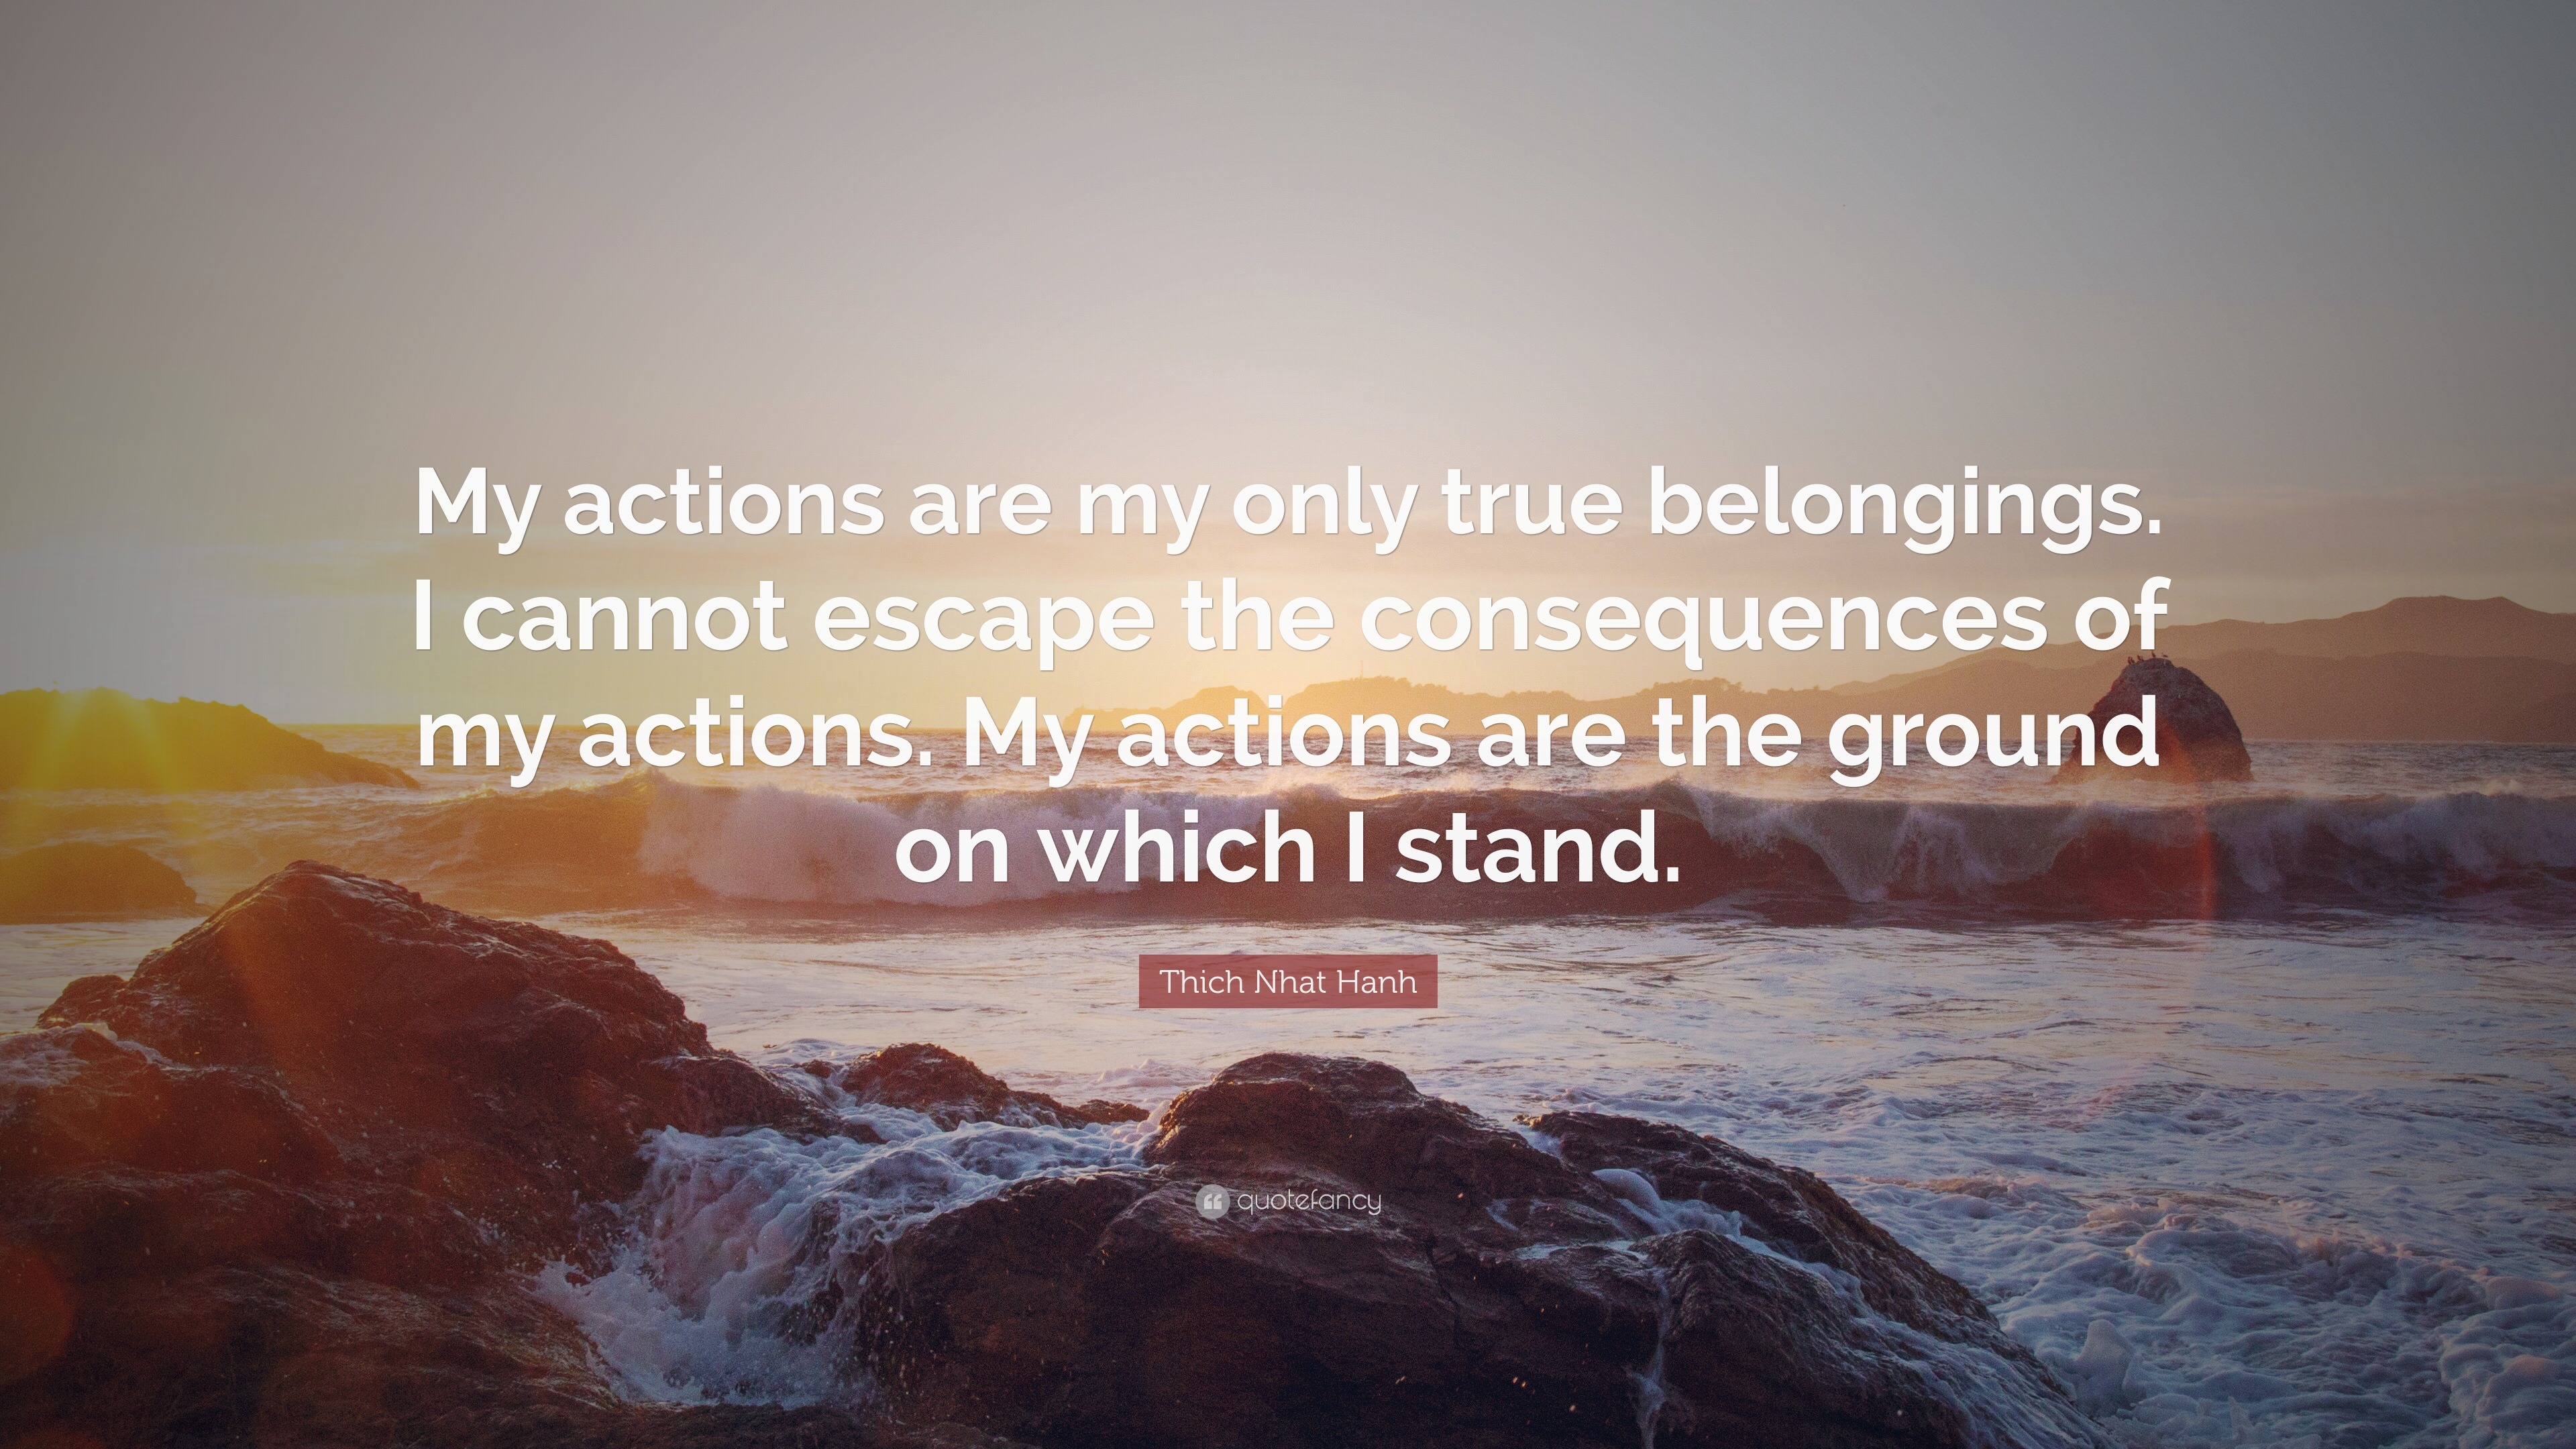 Thich Nhat Hanh Quote “My actions are my only true belongings I cannot